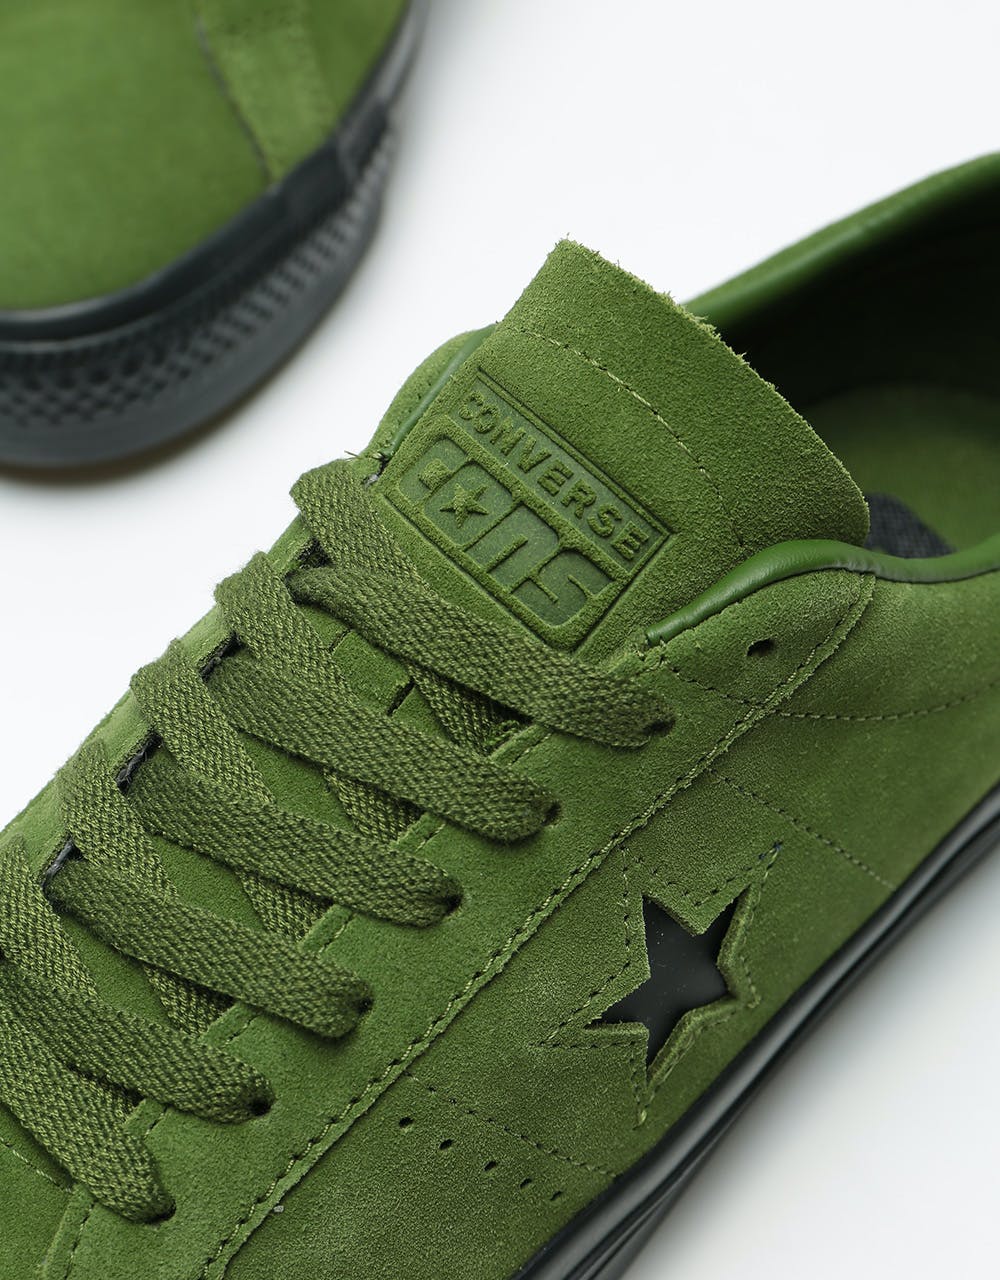 Converse One Star Pro Ox Suede Skate Shoes - Cypress Green/Black/Black